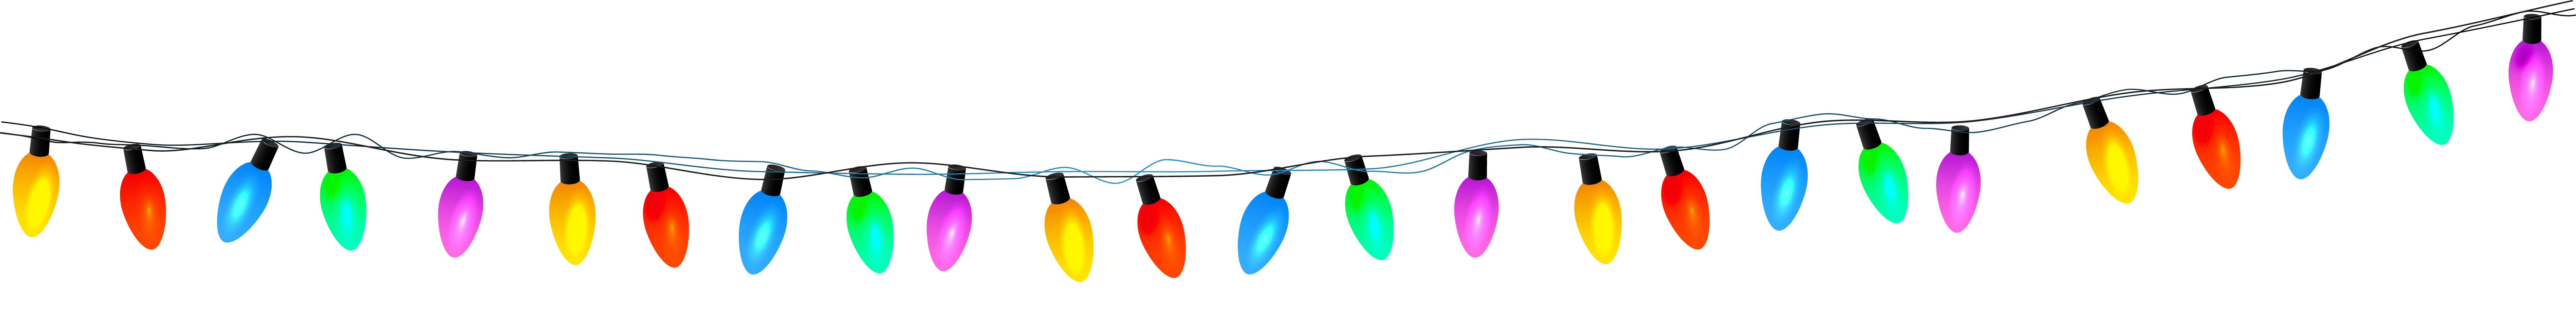 Christmas lights transparent png. Lighting clipart draw